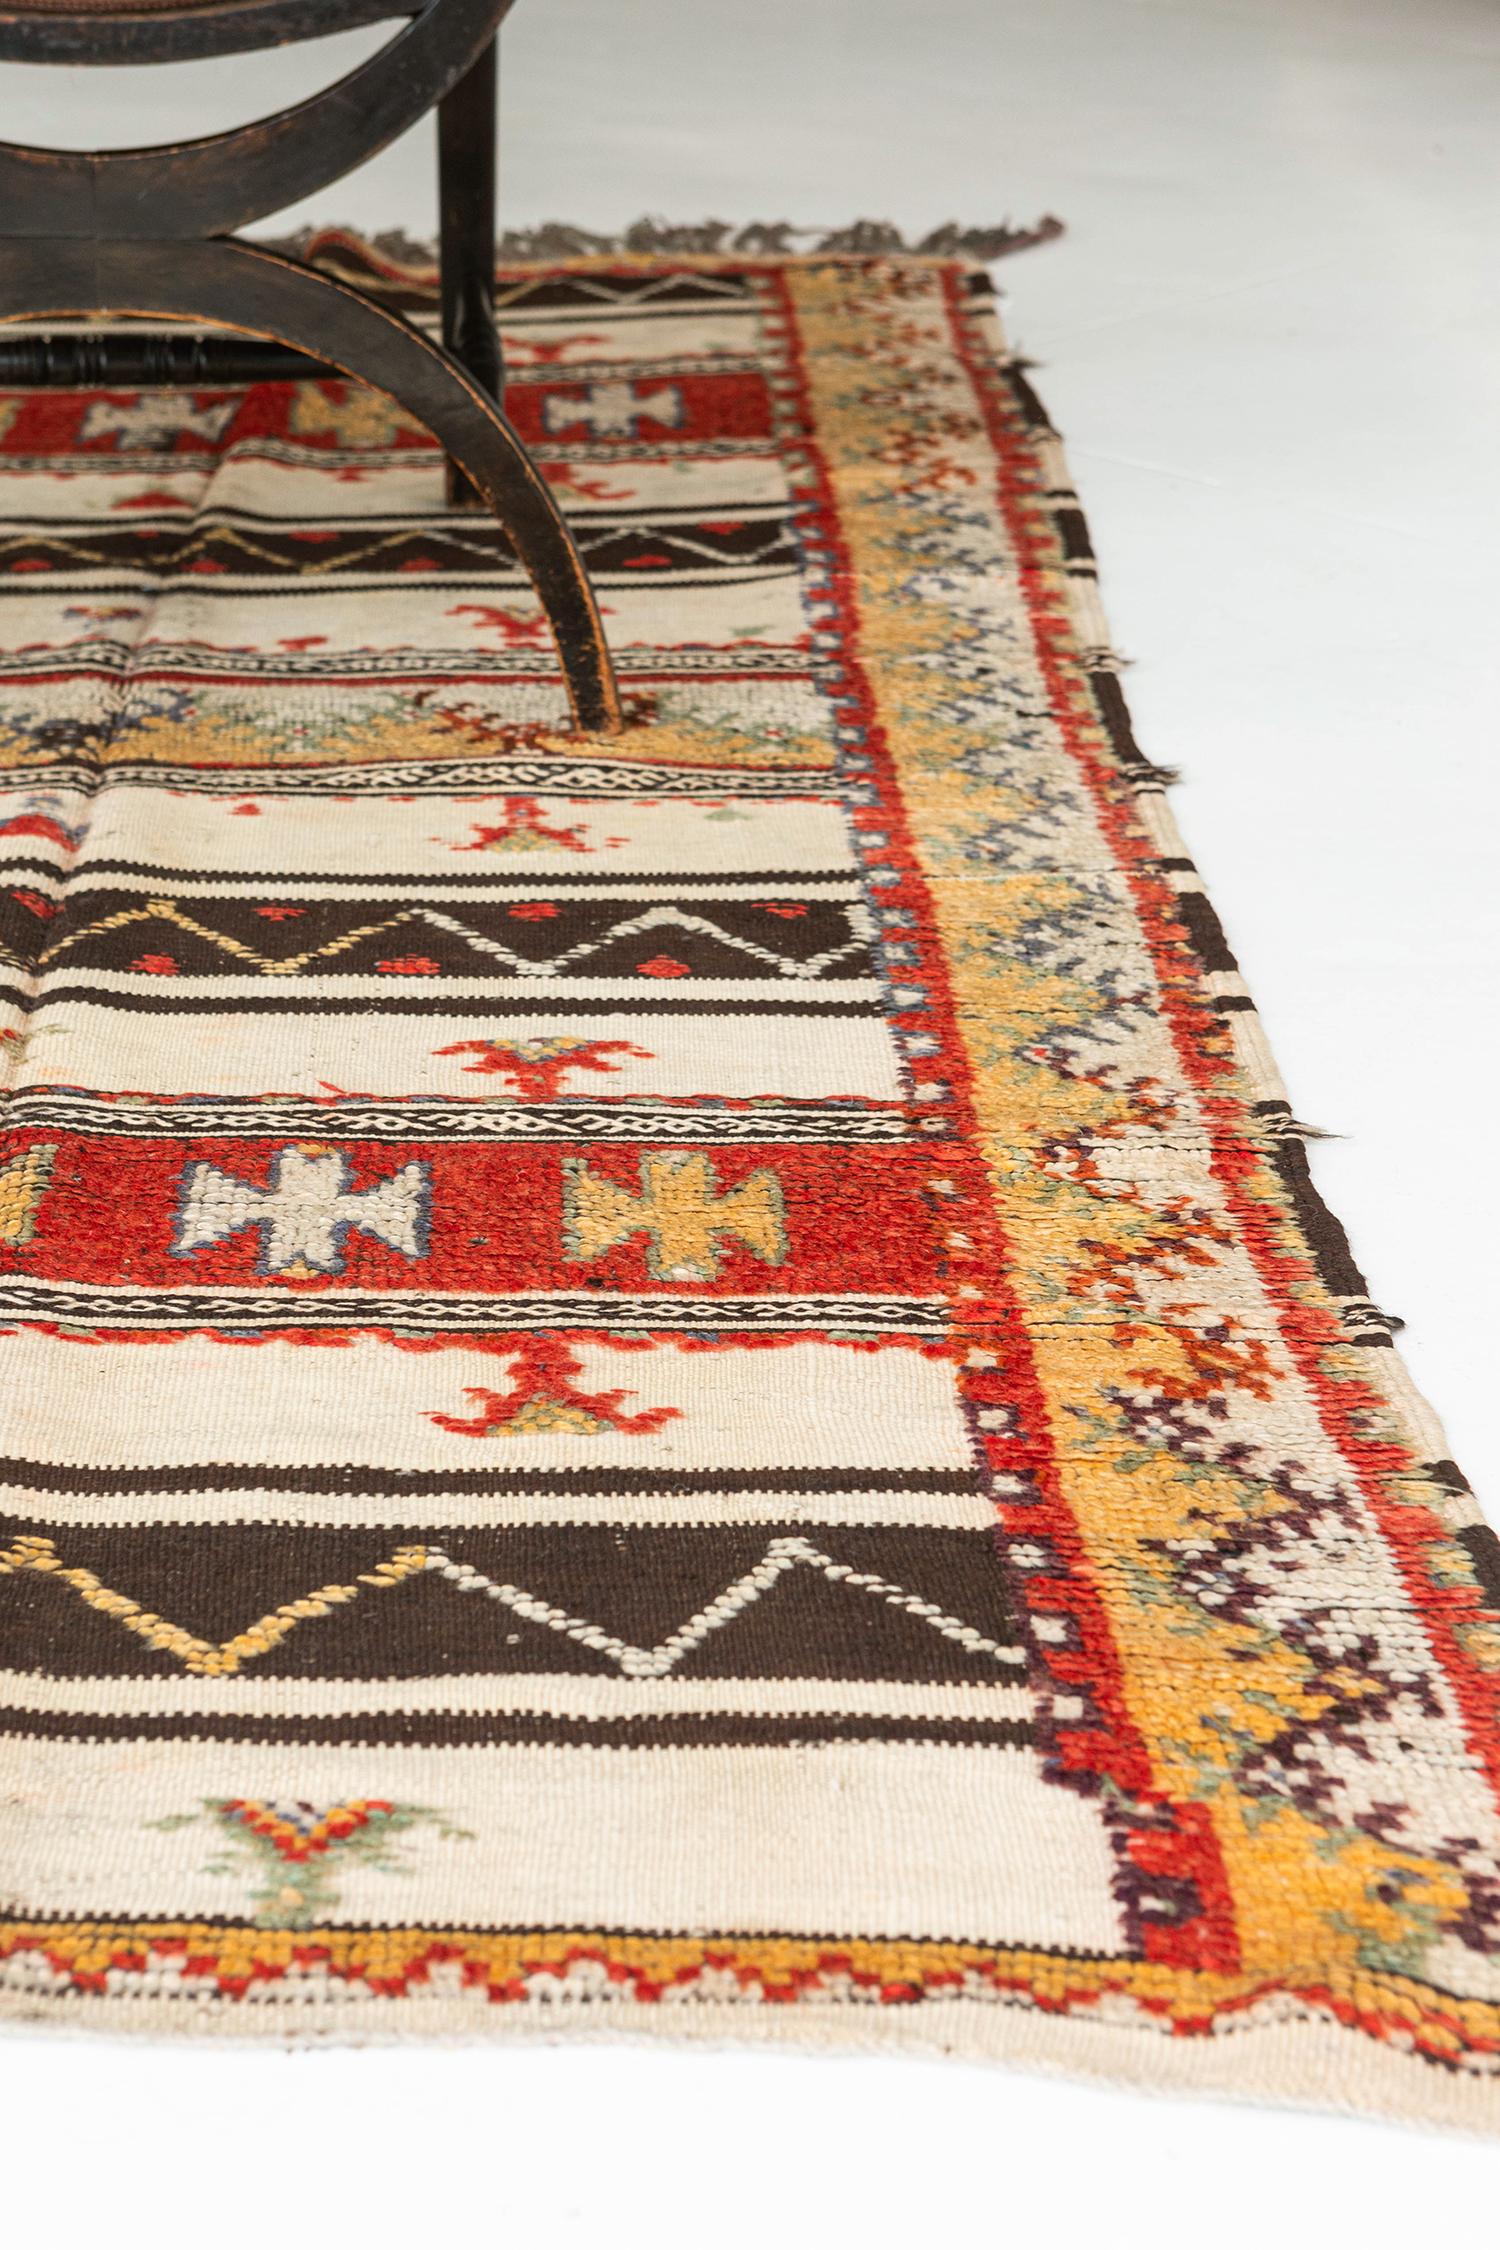 Banded flat-weave in ivory and natural brown embellished with eye-catching pile elements in cherry red, soft gold, olive, and white. Touched by time vintage, this is a unique tribal rug from the Atlas Mountains of Morocco.